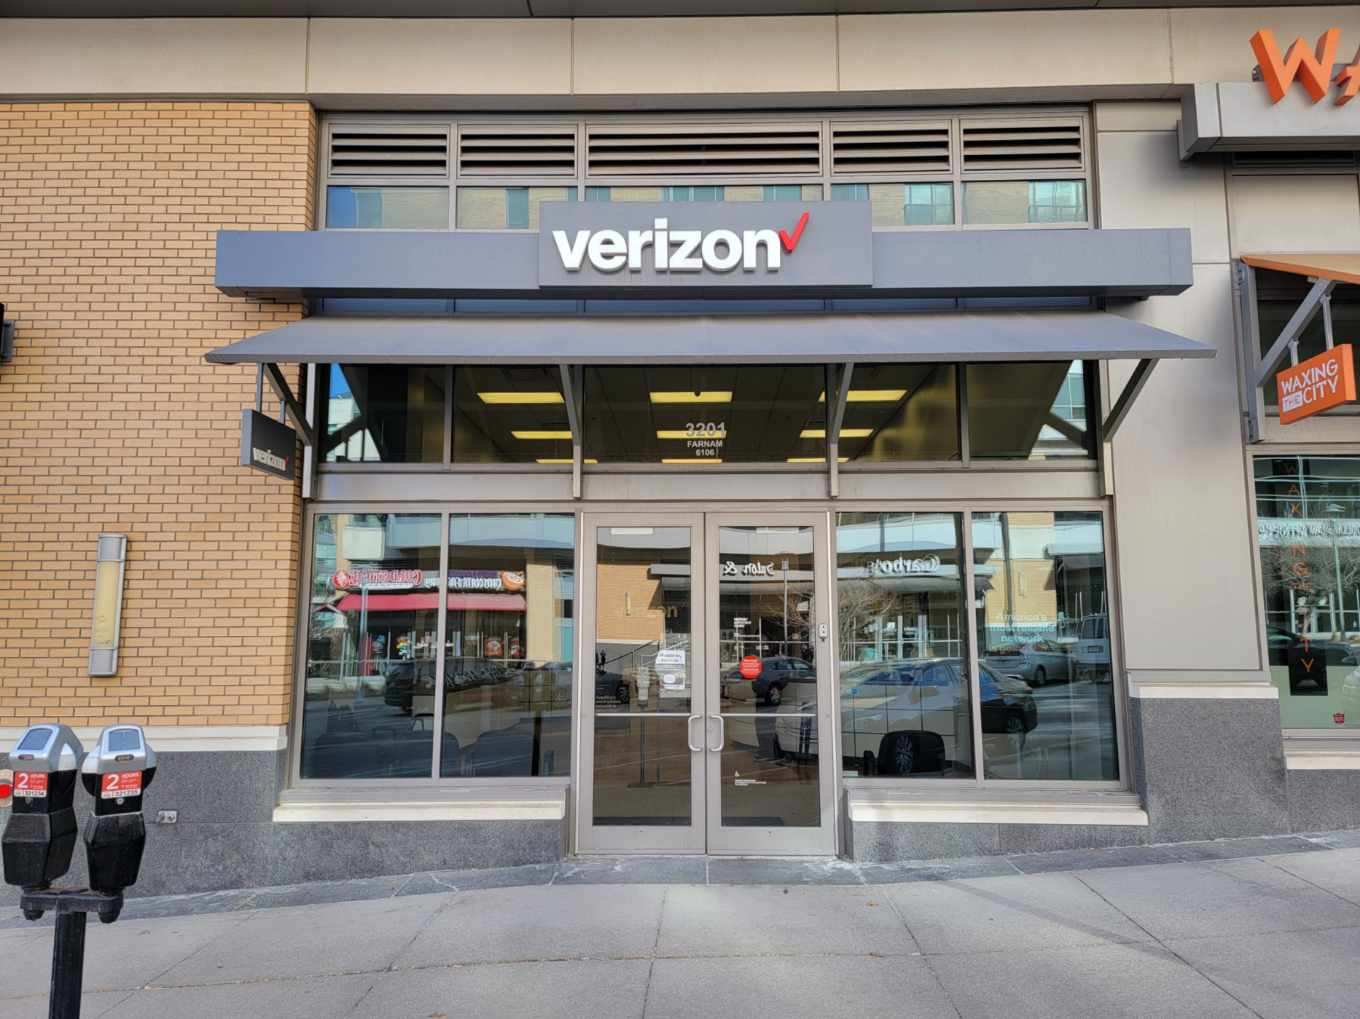 The Ultimate Guide to Finding Verizon Stores in Seattle - Services and products offered at Downtown Seattle stores